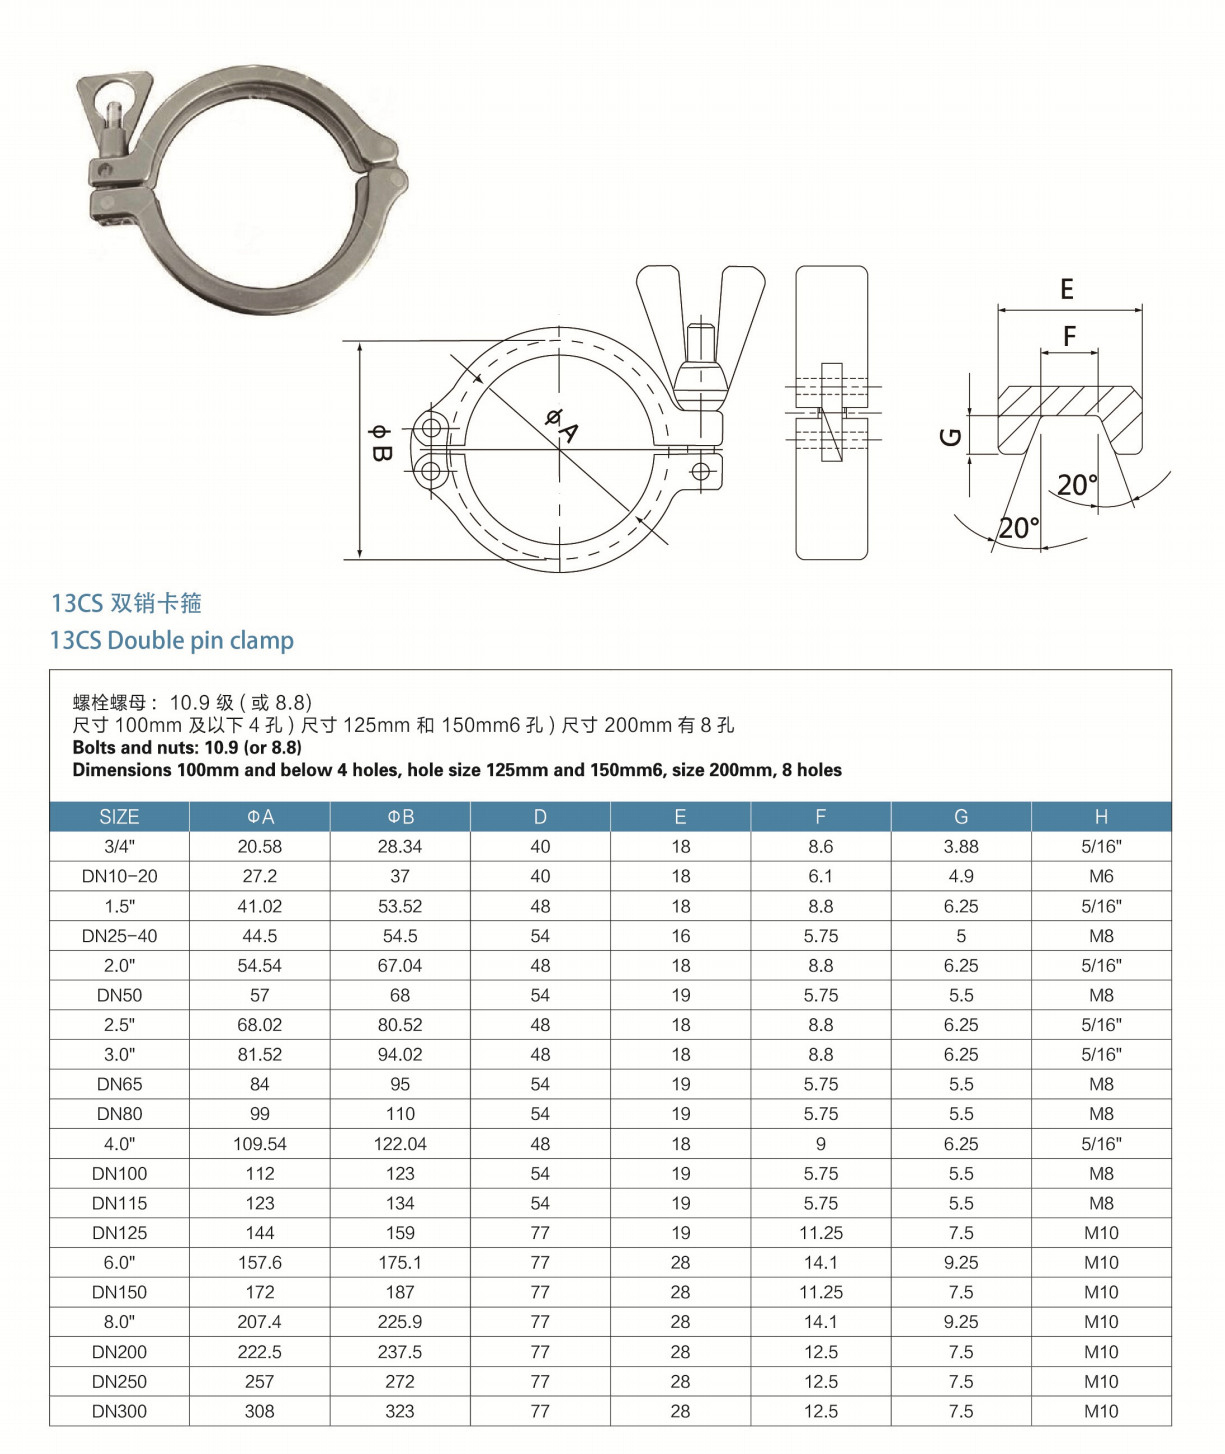 drawing of 13CS double pin clamp